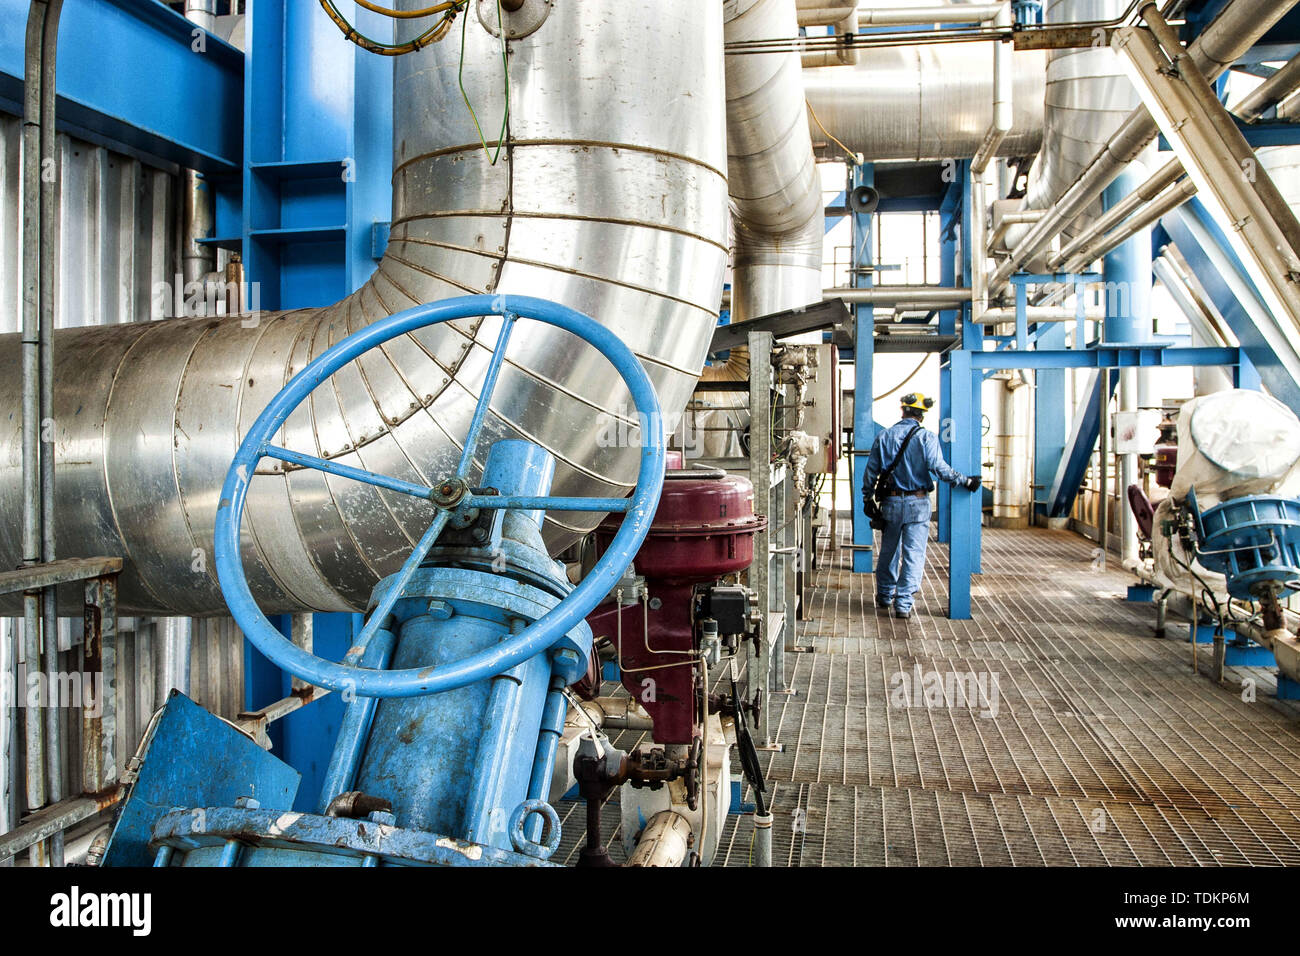 Colon, Panama. 31st Aug, 2011. A man seen working at the Bahia las Minas Thermal Power Plant, a coal-fired thermal power station in Colon. Credit: Ricardo Ribas/SOPA Images/ZUMA Wire/Alamy Live News Stock Photo